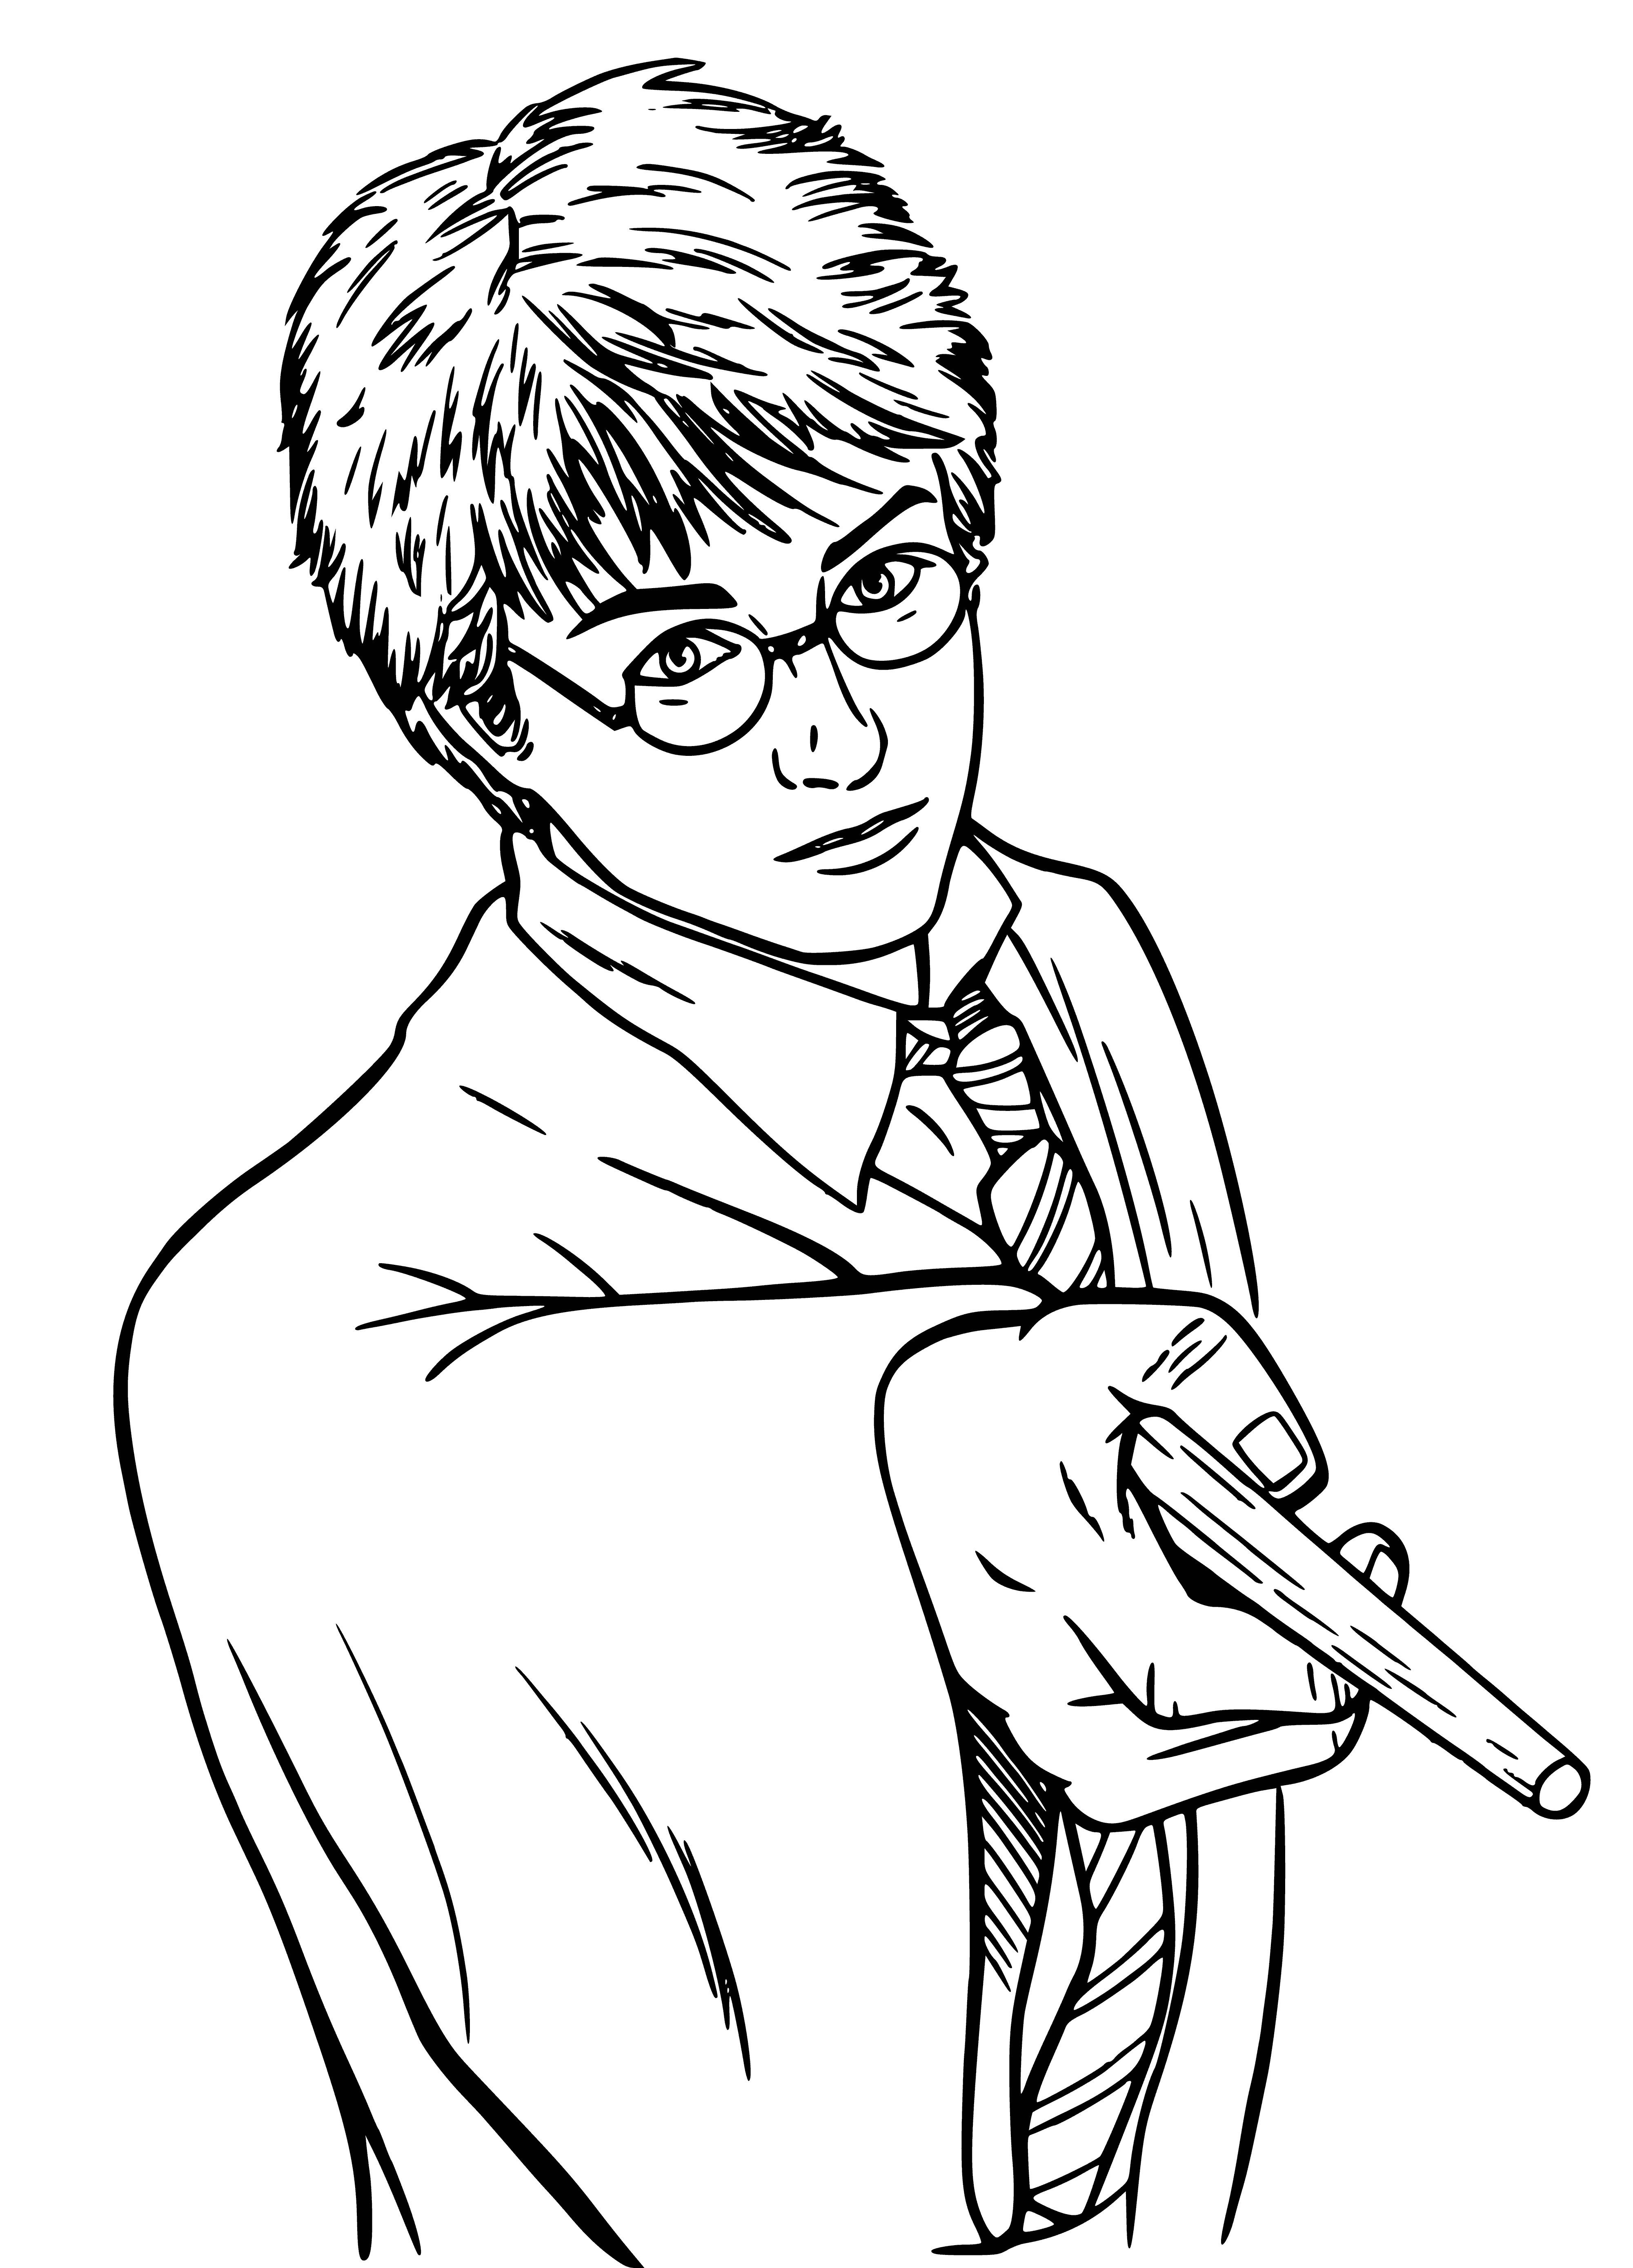 coloring page: Harry Potter stands tall in Hogwarts Great Hall, surrounded by friends. Wearing robes and carrying wand, scar visible on forehead.